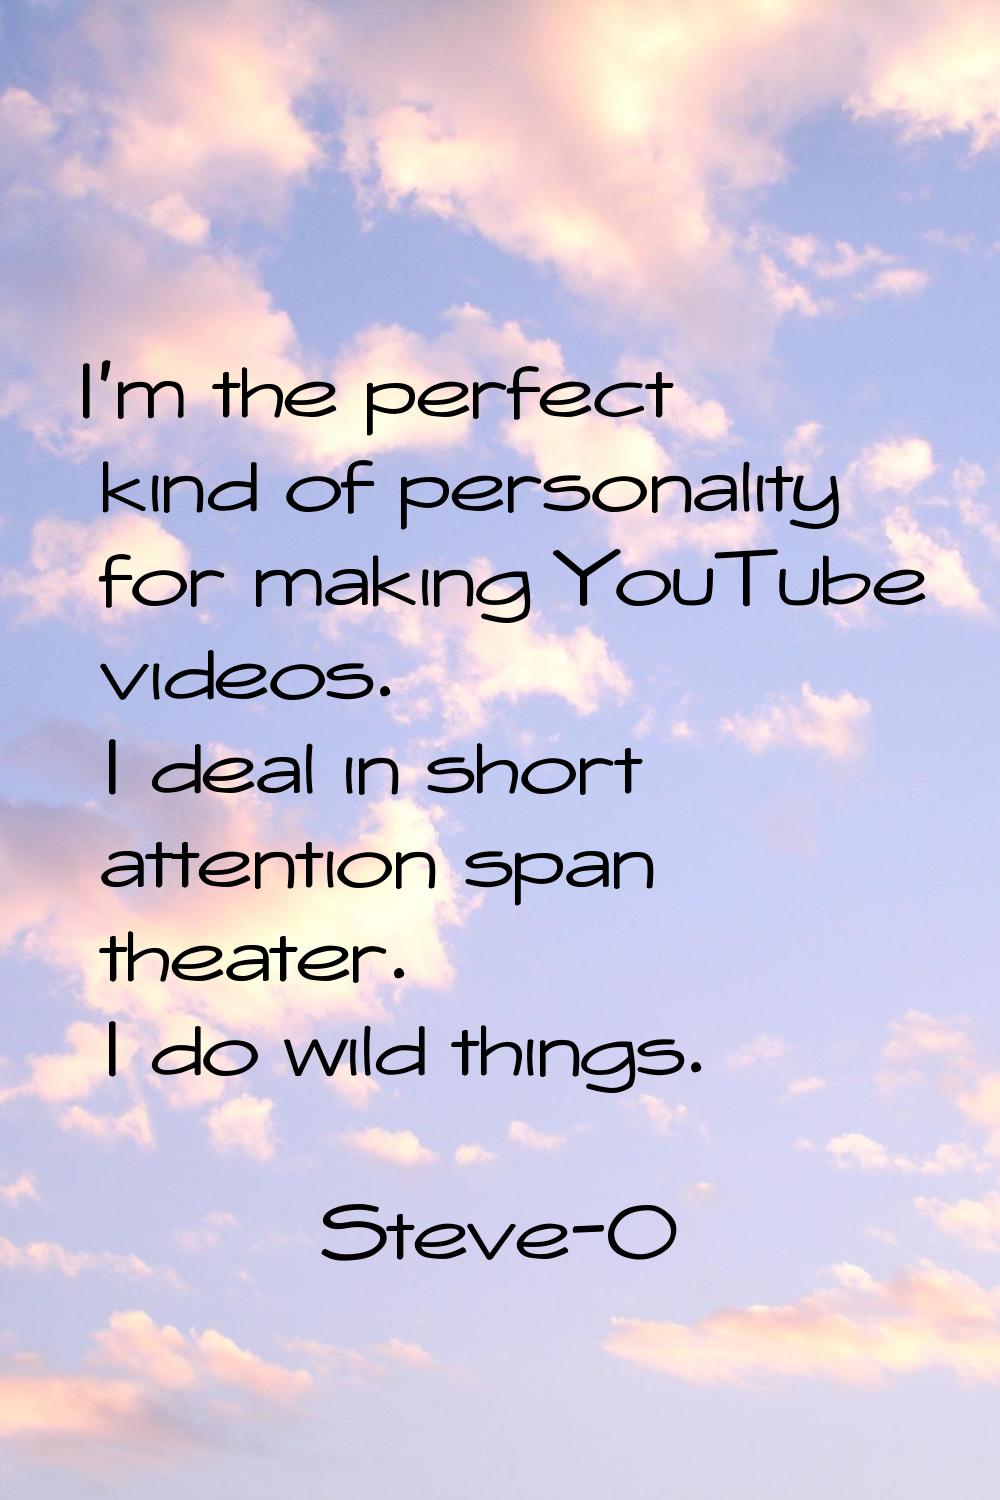 I'm the perfect kind of personality for making YouTube videos. I deal in short attention span theat